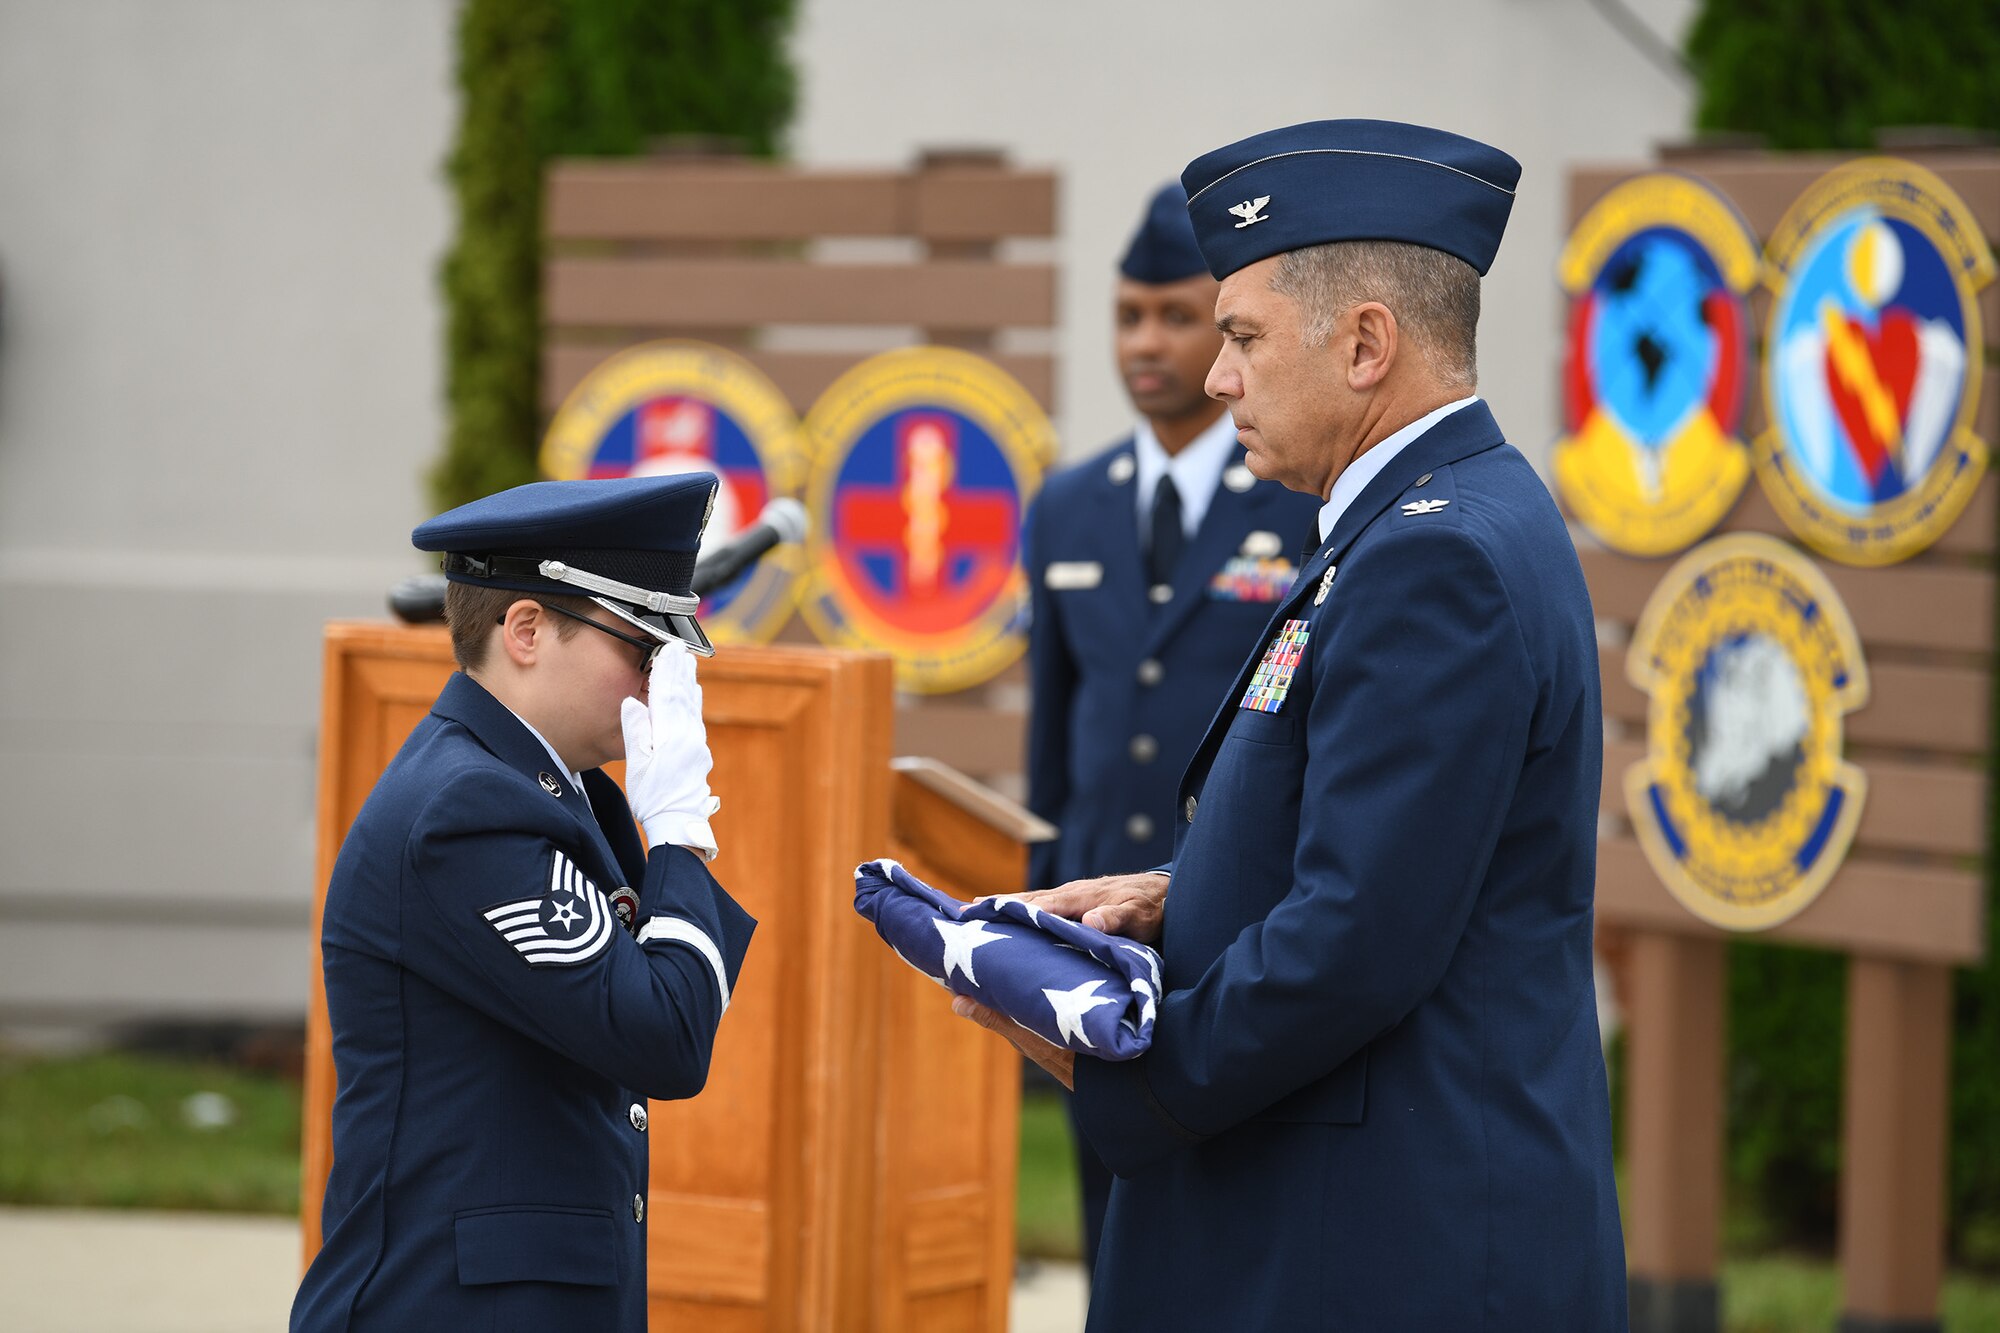 Tech. Sgt. Molly Cook, Wright-Patterson Air Force Base Honor Guard member, presents a flag to Col. Raymond Smith Jr., during the 445th Airlift Wing 9/11 remembrance ceremony Sept. 11, 2022.